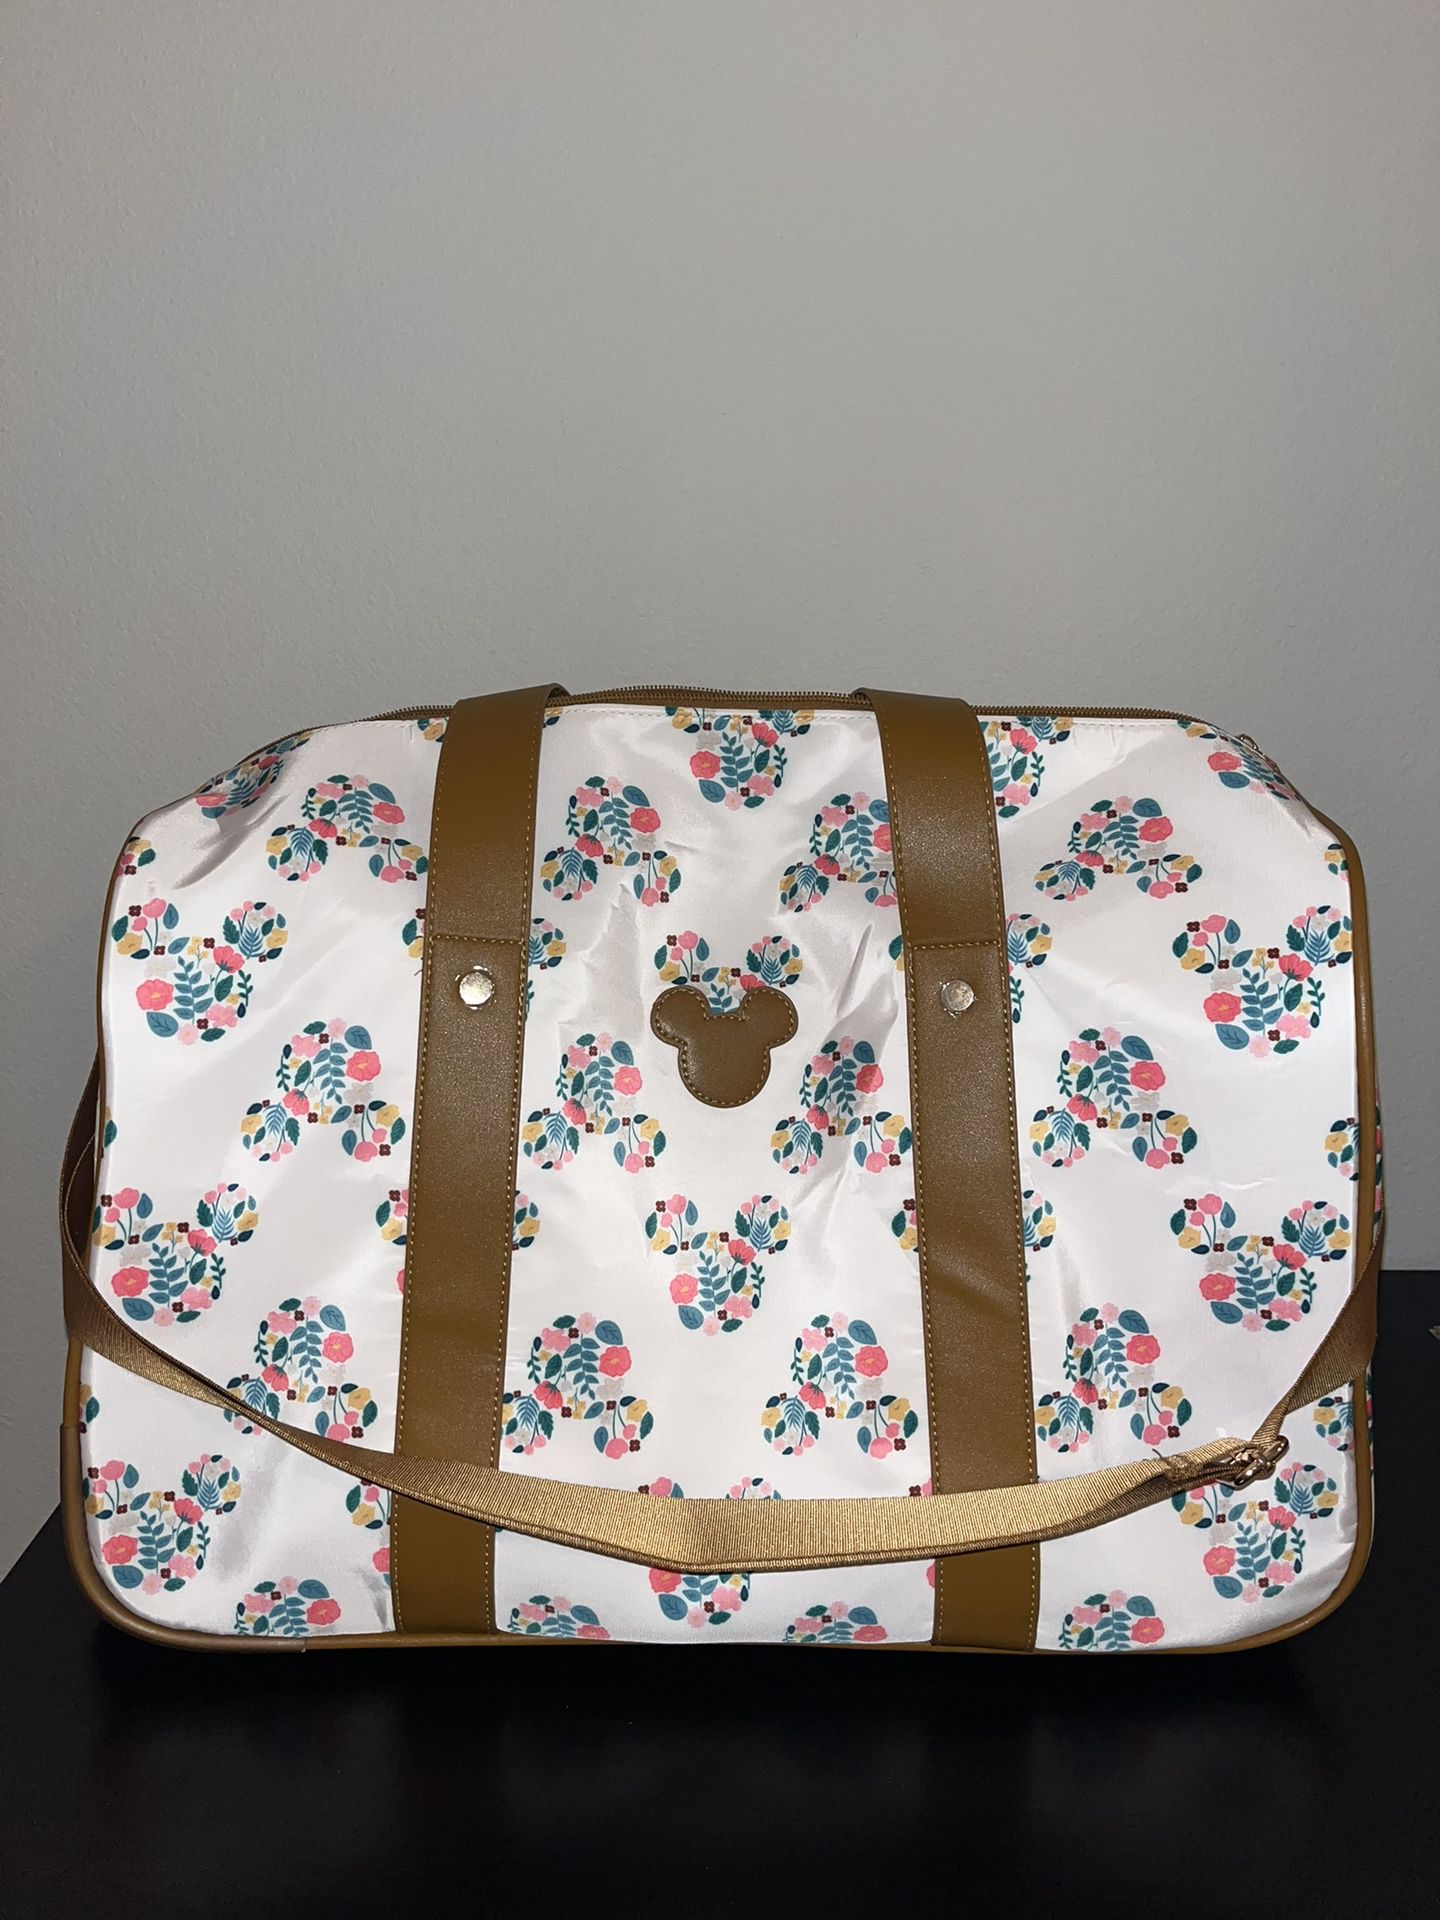 Disney Mickey Mouse Floral Duffel Bag